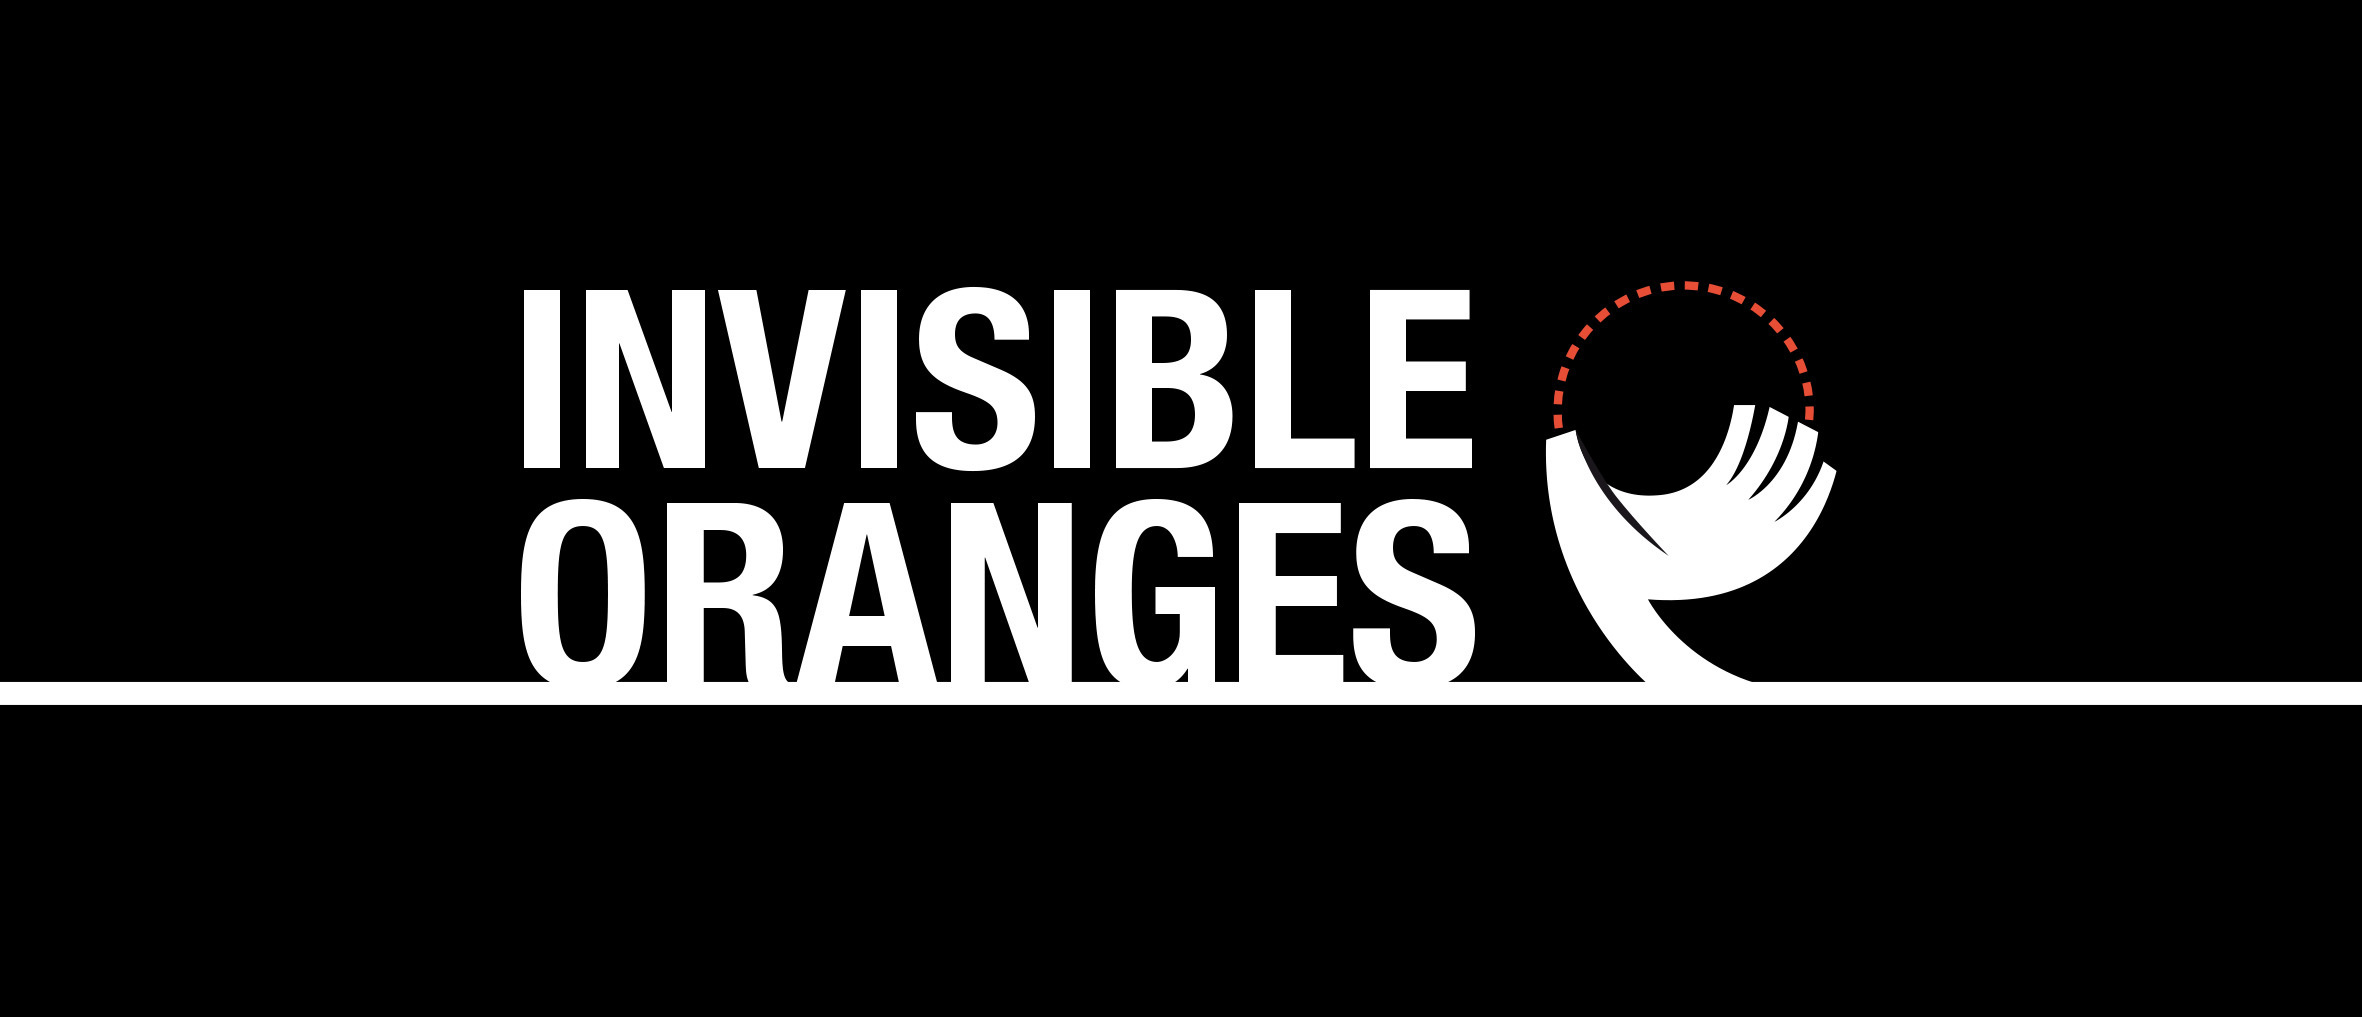 Screaming Bloody Oranges: The Invisible Oranges Podcast header image 1